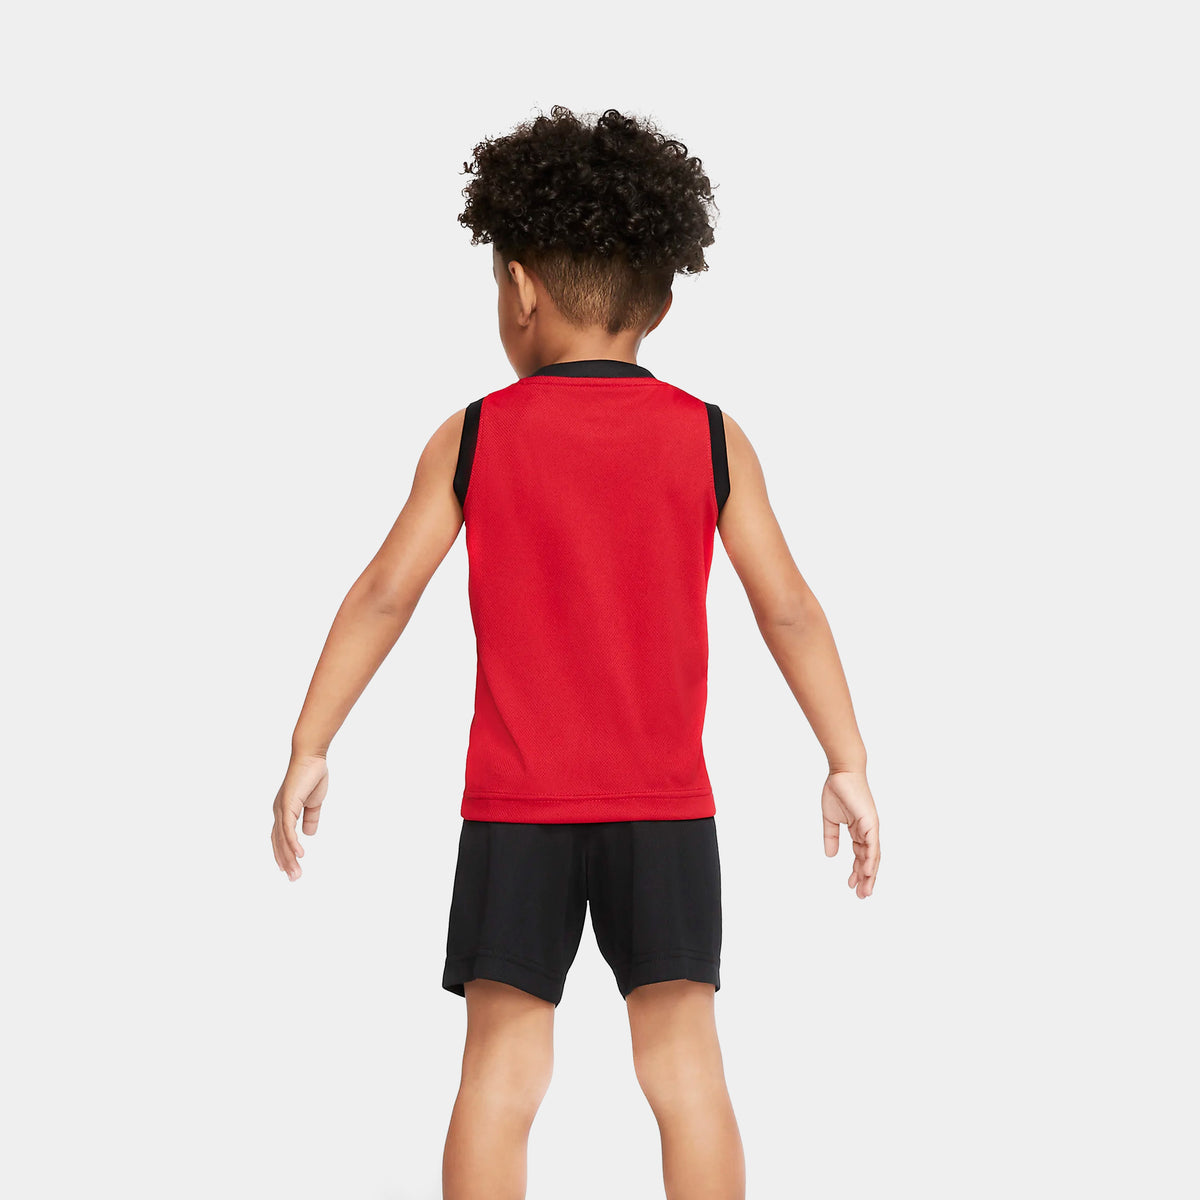 BR Muscle Tank and Shorts Set Toddler Set (Black/Red)